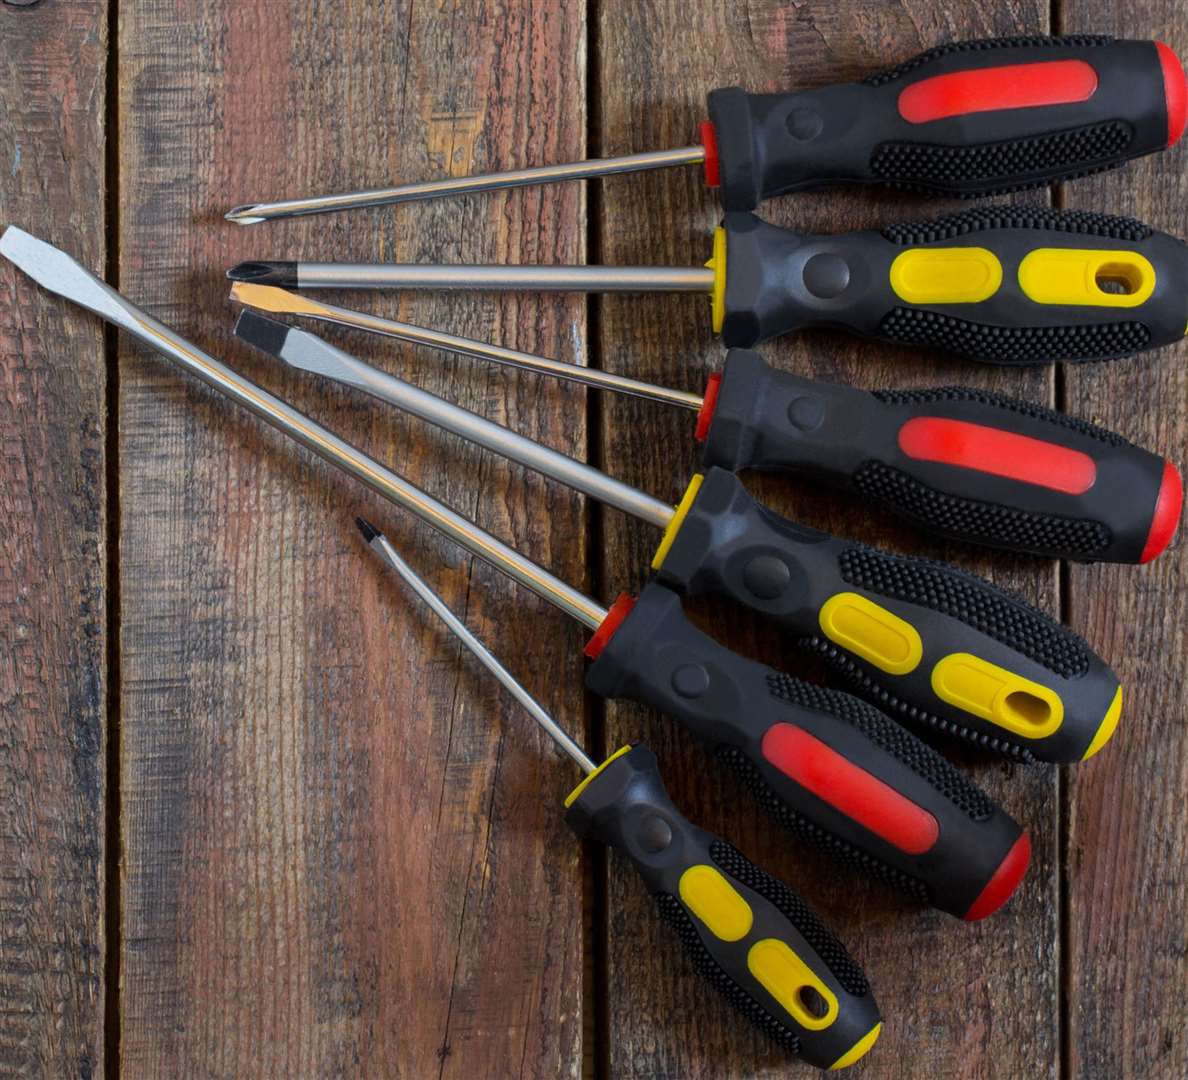 The couple were threatened with a screwdriver. Picture: iStock/PA